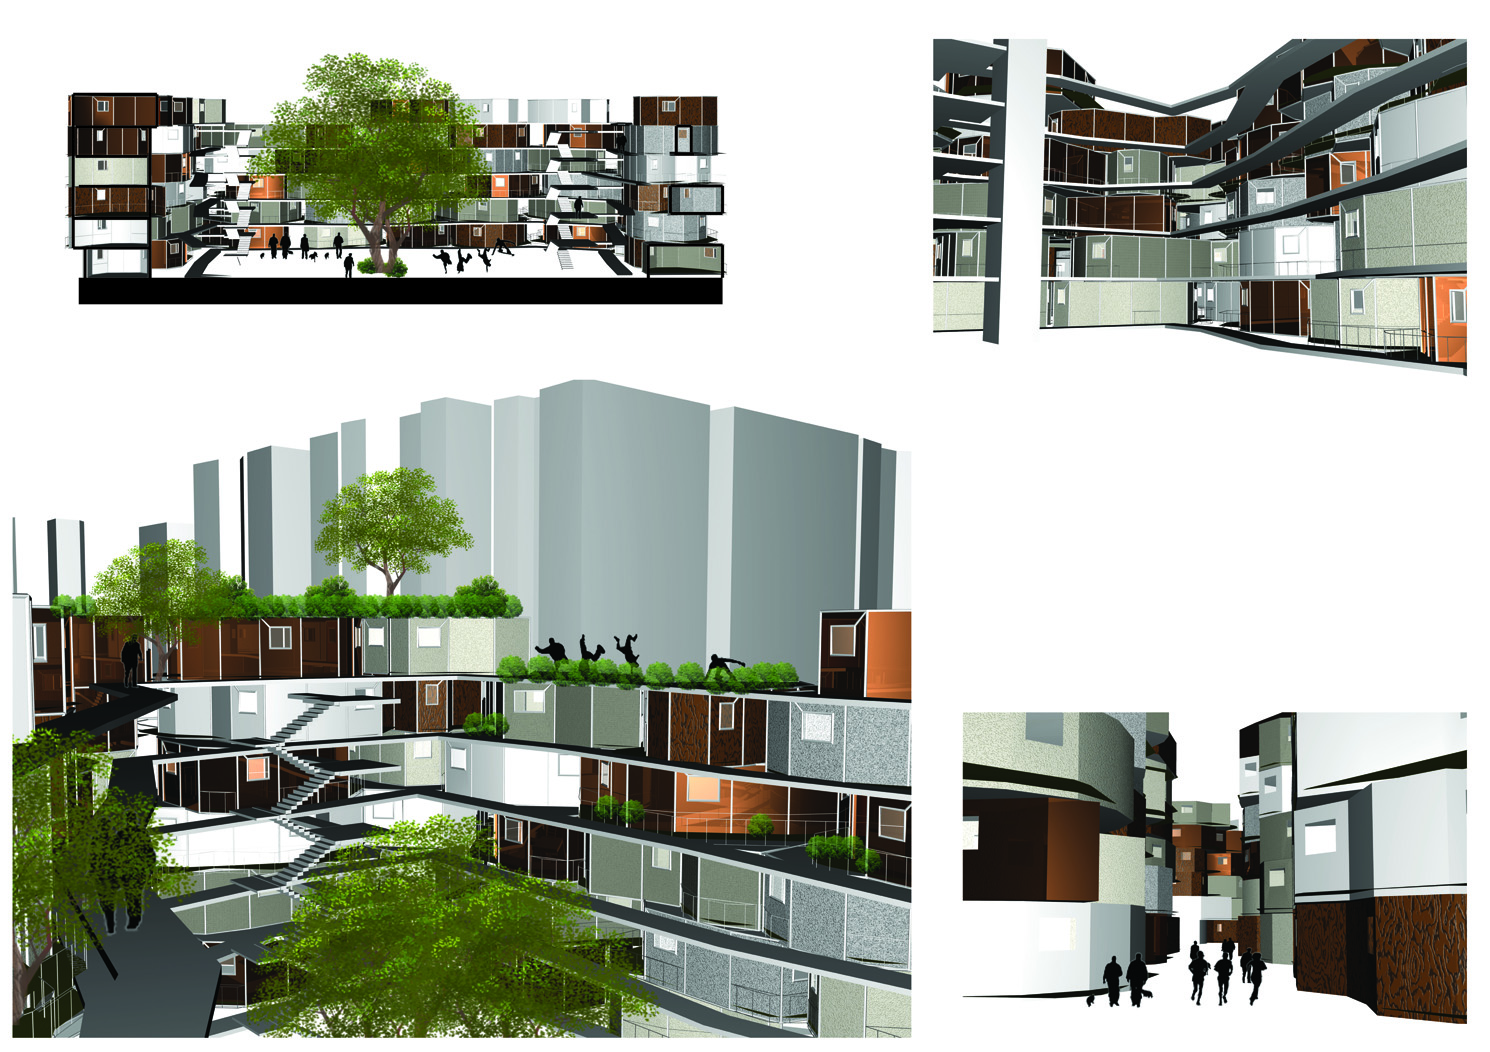 Thesis proposal of department of interior architecture